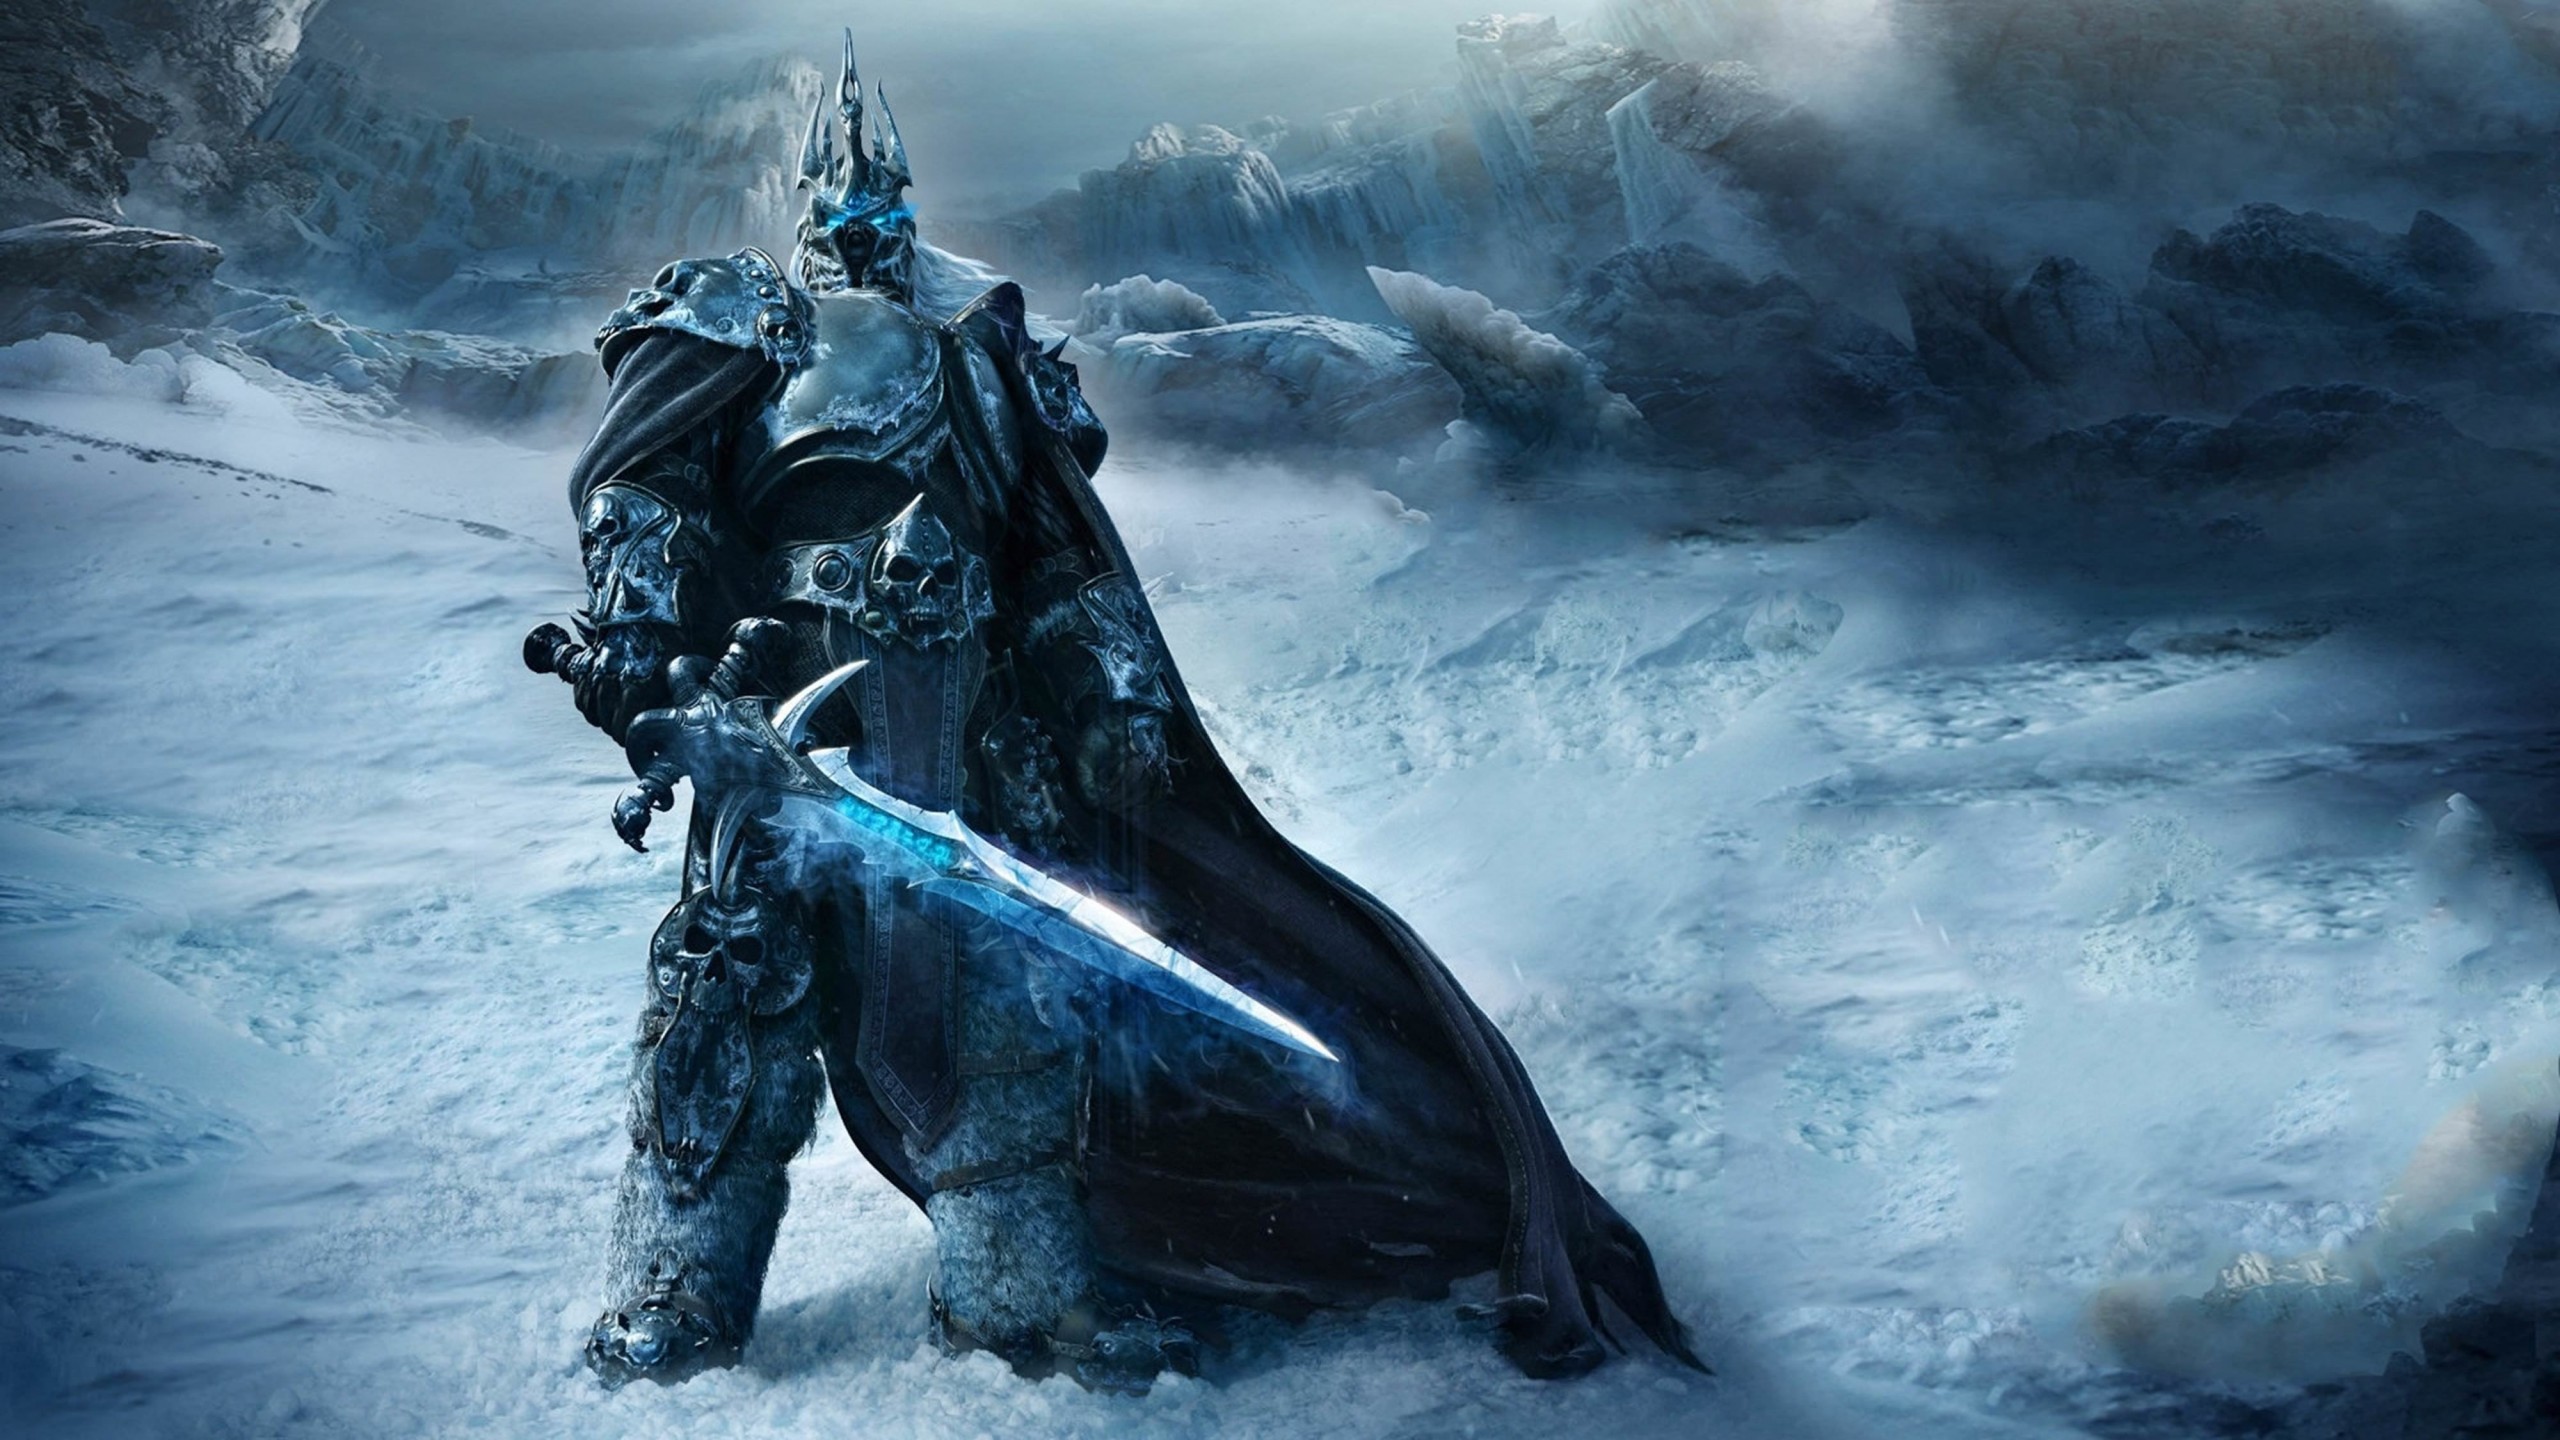 World of Warcraft: Wrath of the Lich King Wallpaper for Desktop 2560x1440